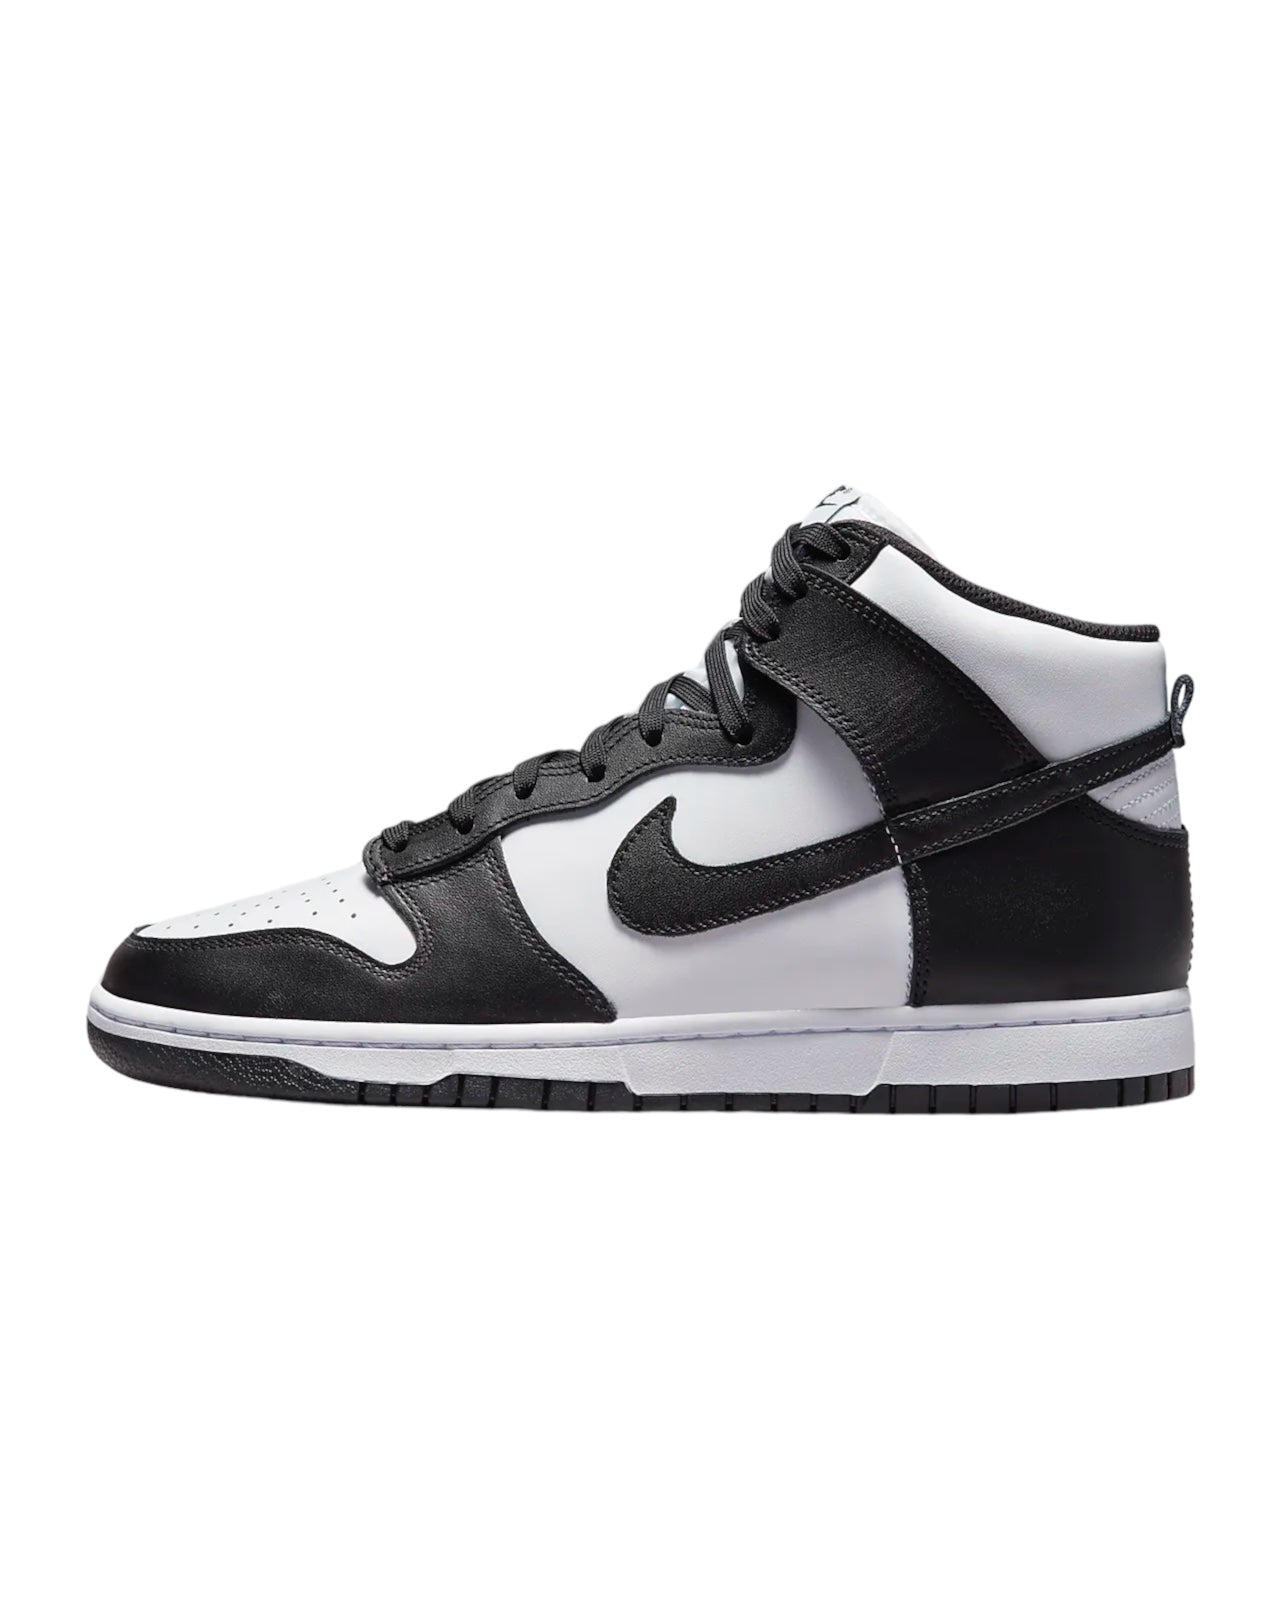 Nike Dunk High Panda Sneakers - Genuine Design Luxury Consignment for Men. New & Pre-Owned Clothing, Shoes, & Accessories. Calgary, Canada